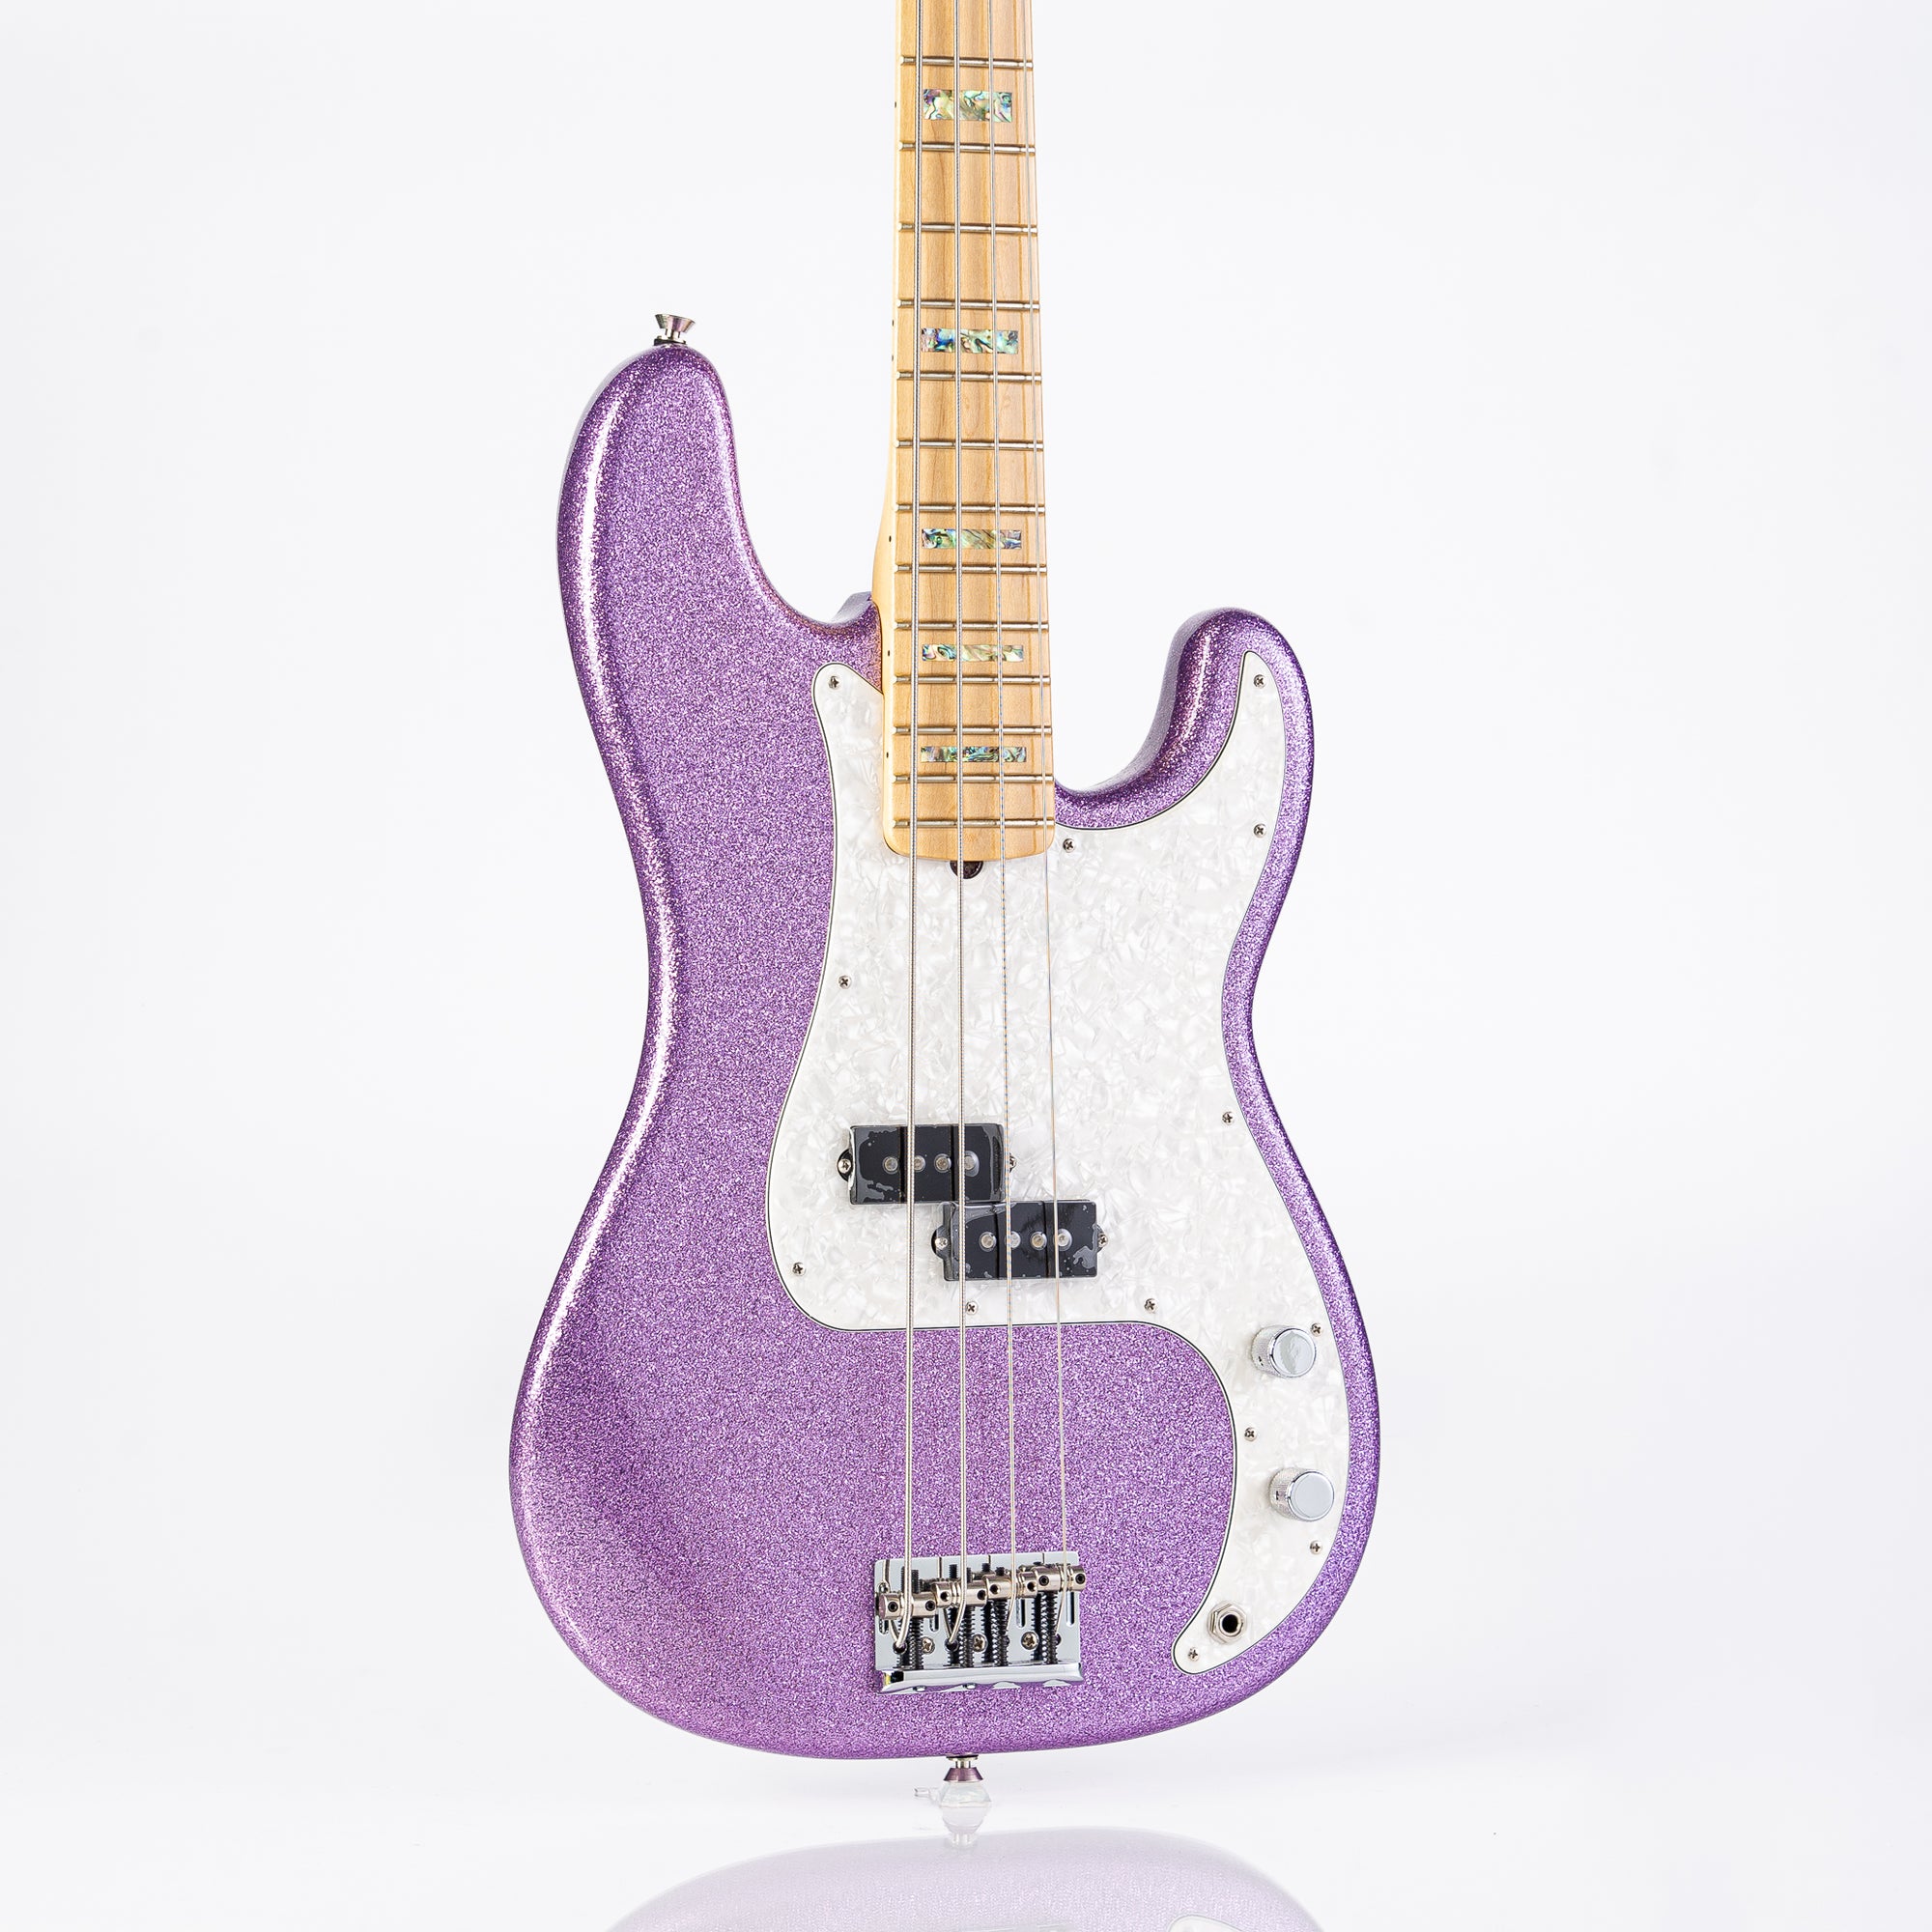 USED Fender Adam Clayton Signature Precision Bass Guitar- Purple Sparkle with Houndstooth HSC